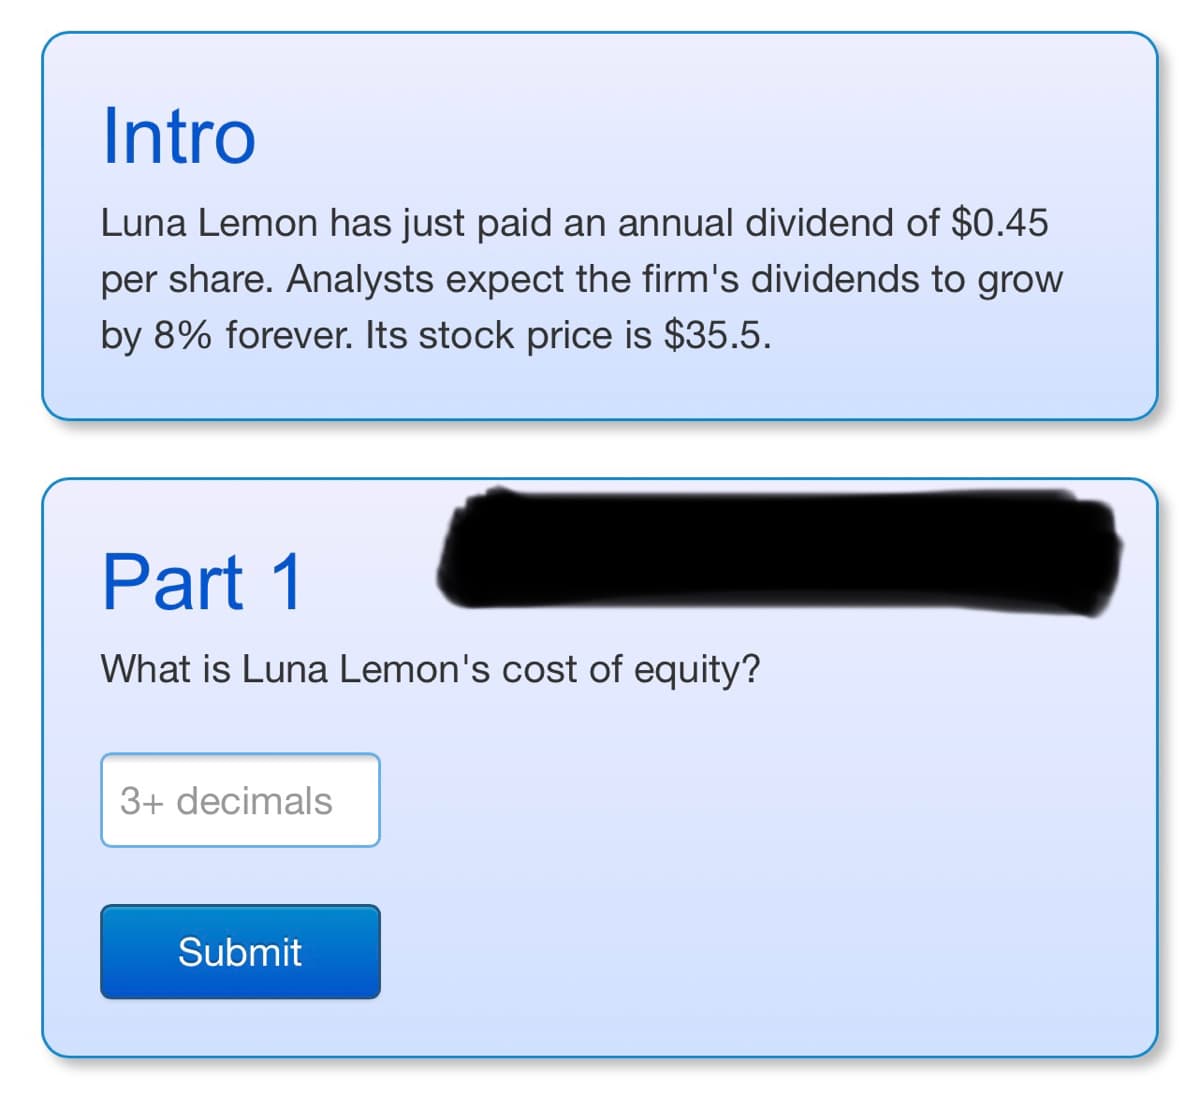 Intro
Luna Lemon has just paid an annual dividend of $0.45
per share. Analysts expect the firm's dividends to grow
by 8% forever. Its stock price is $35.5.
Part 1
What is Luna Lemon's cost of equity?
3+ decimals
Submit